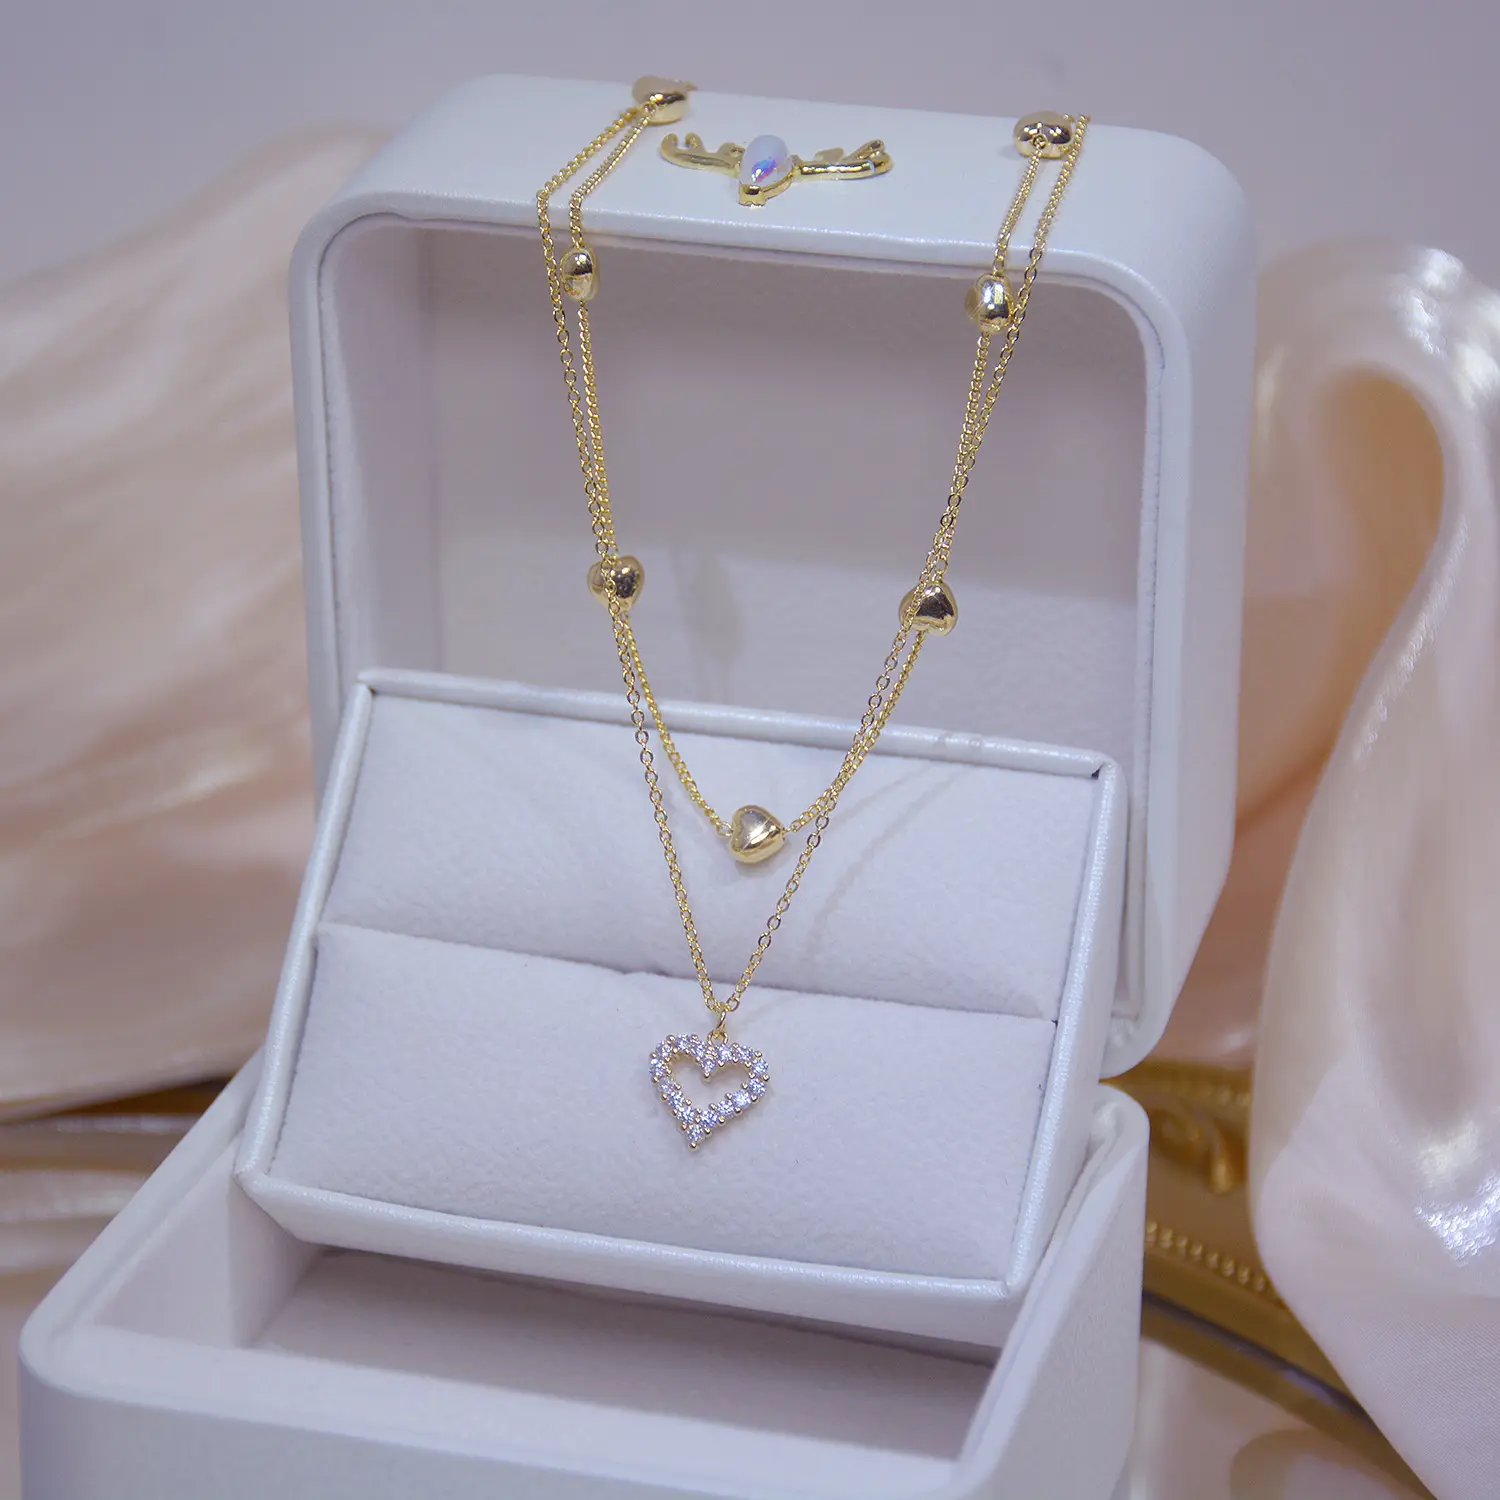 Double Layer Edgy Style Heart Pendant Necklace Zircon Clavicle Chain Elegant Charm Aesthetic Accessories Designer Brand Jewelry